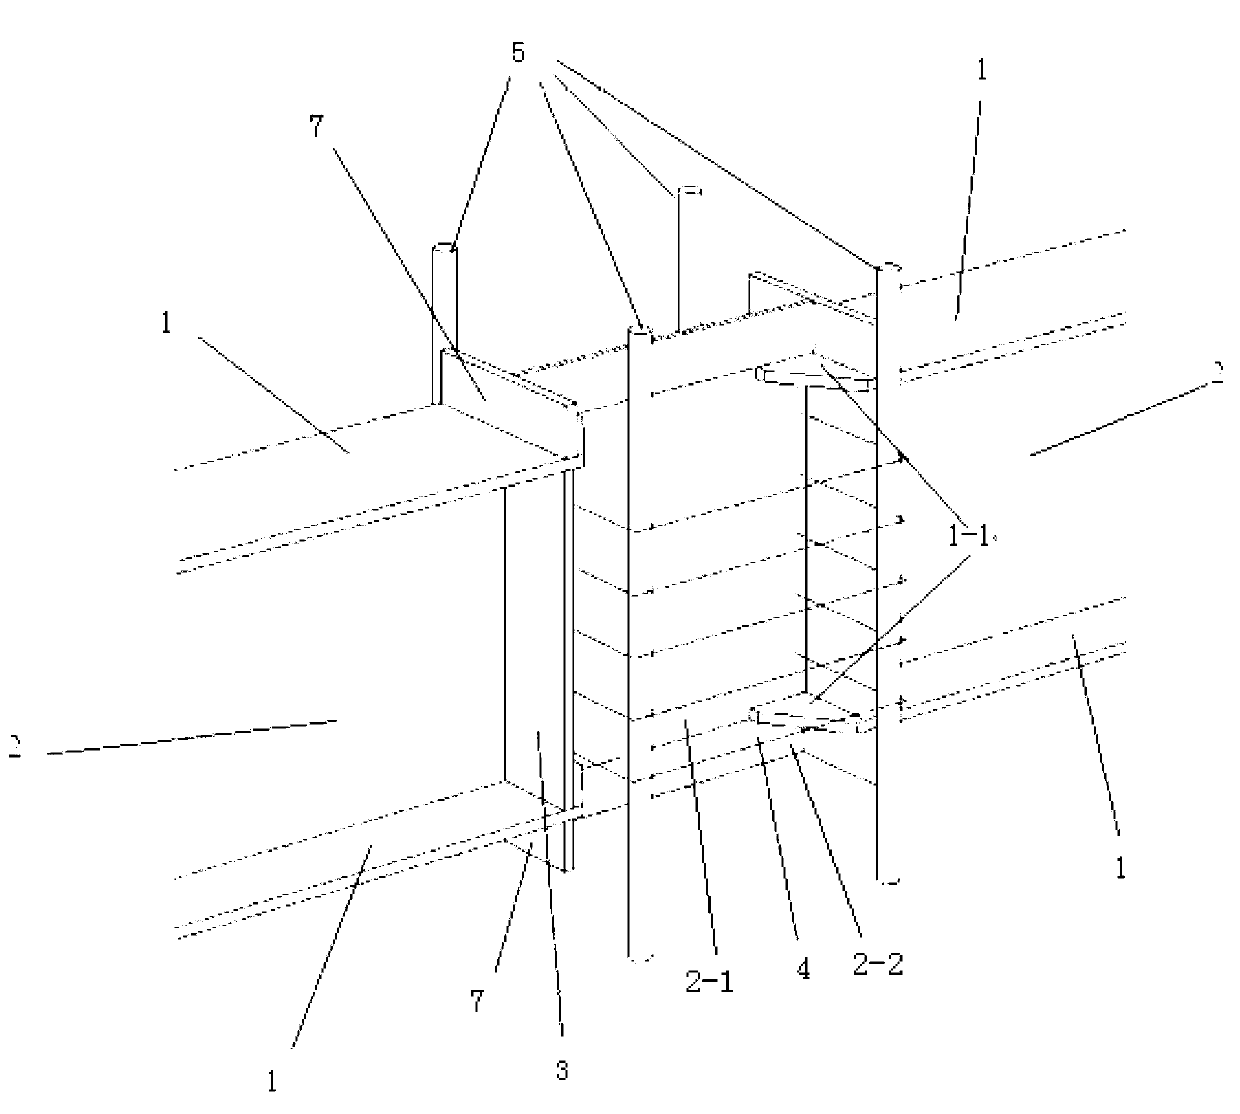 RCS (reinforced concrete structure) combined node with continuous webs and partially-cut flanges